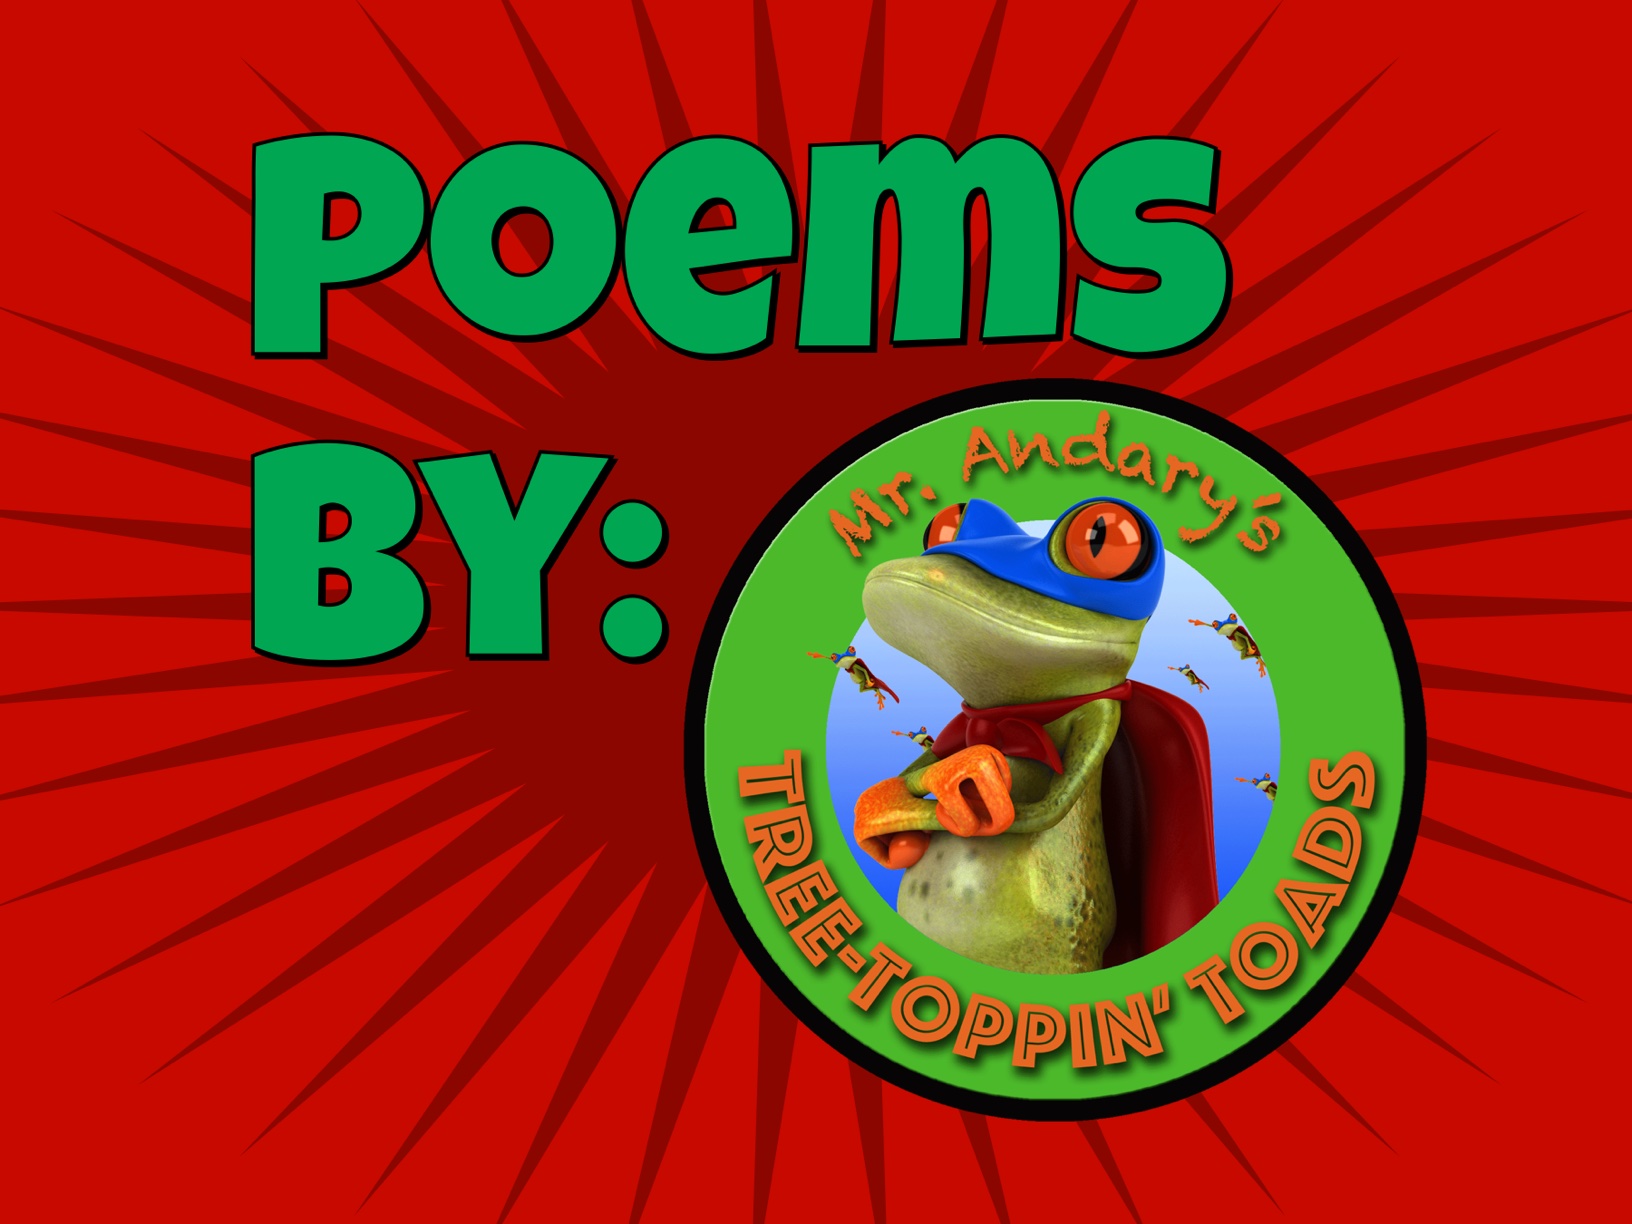 Poems By Mr. Andary's Tree-Toppin' Toads 16-17